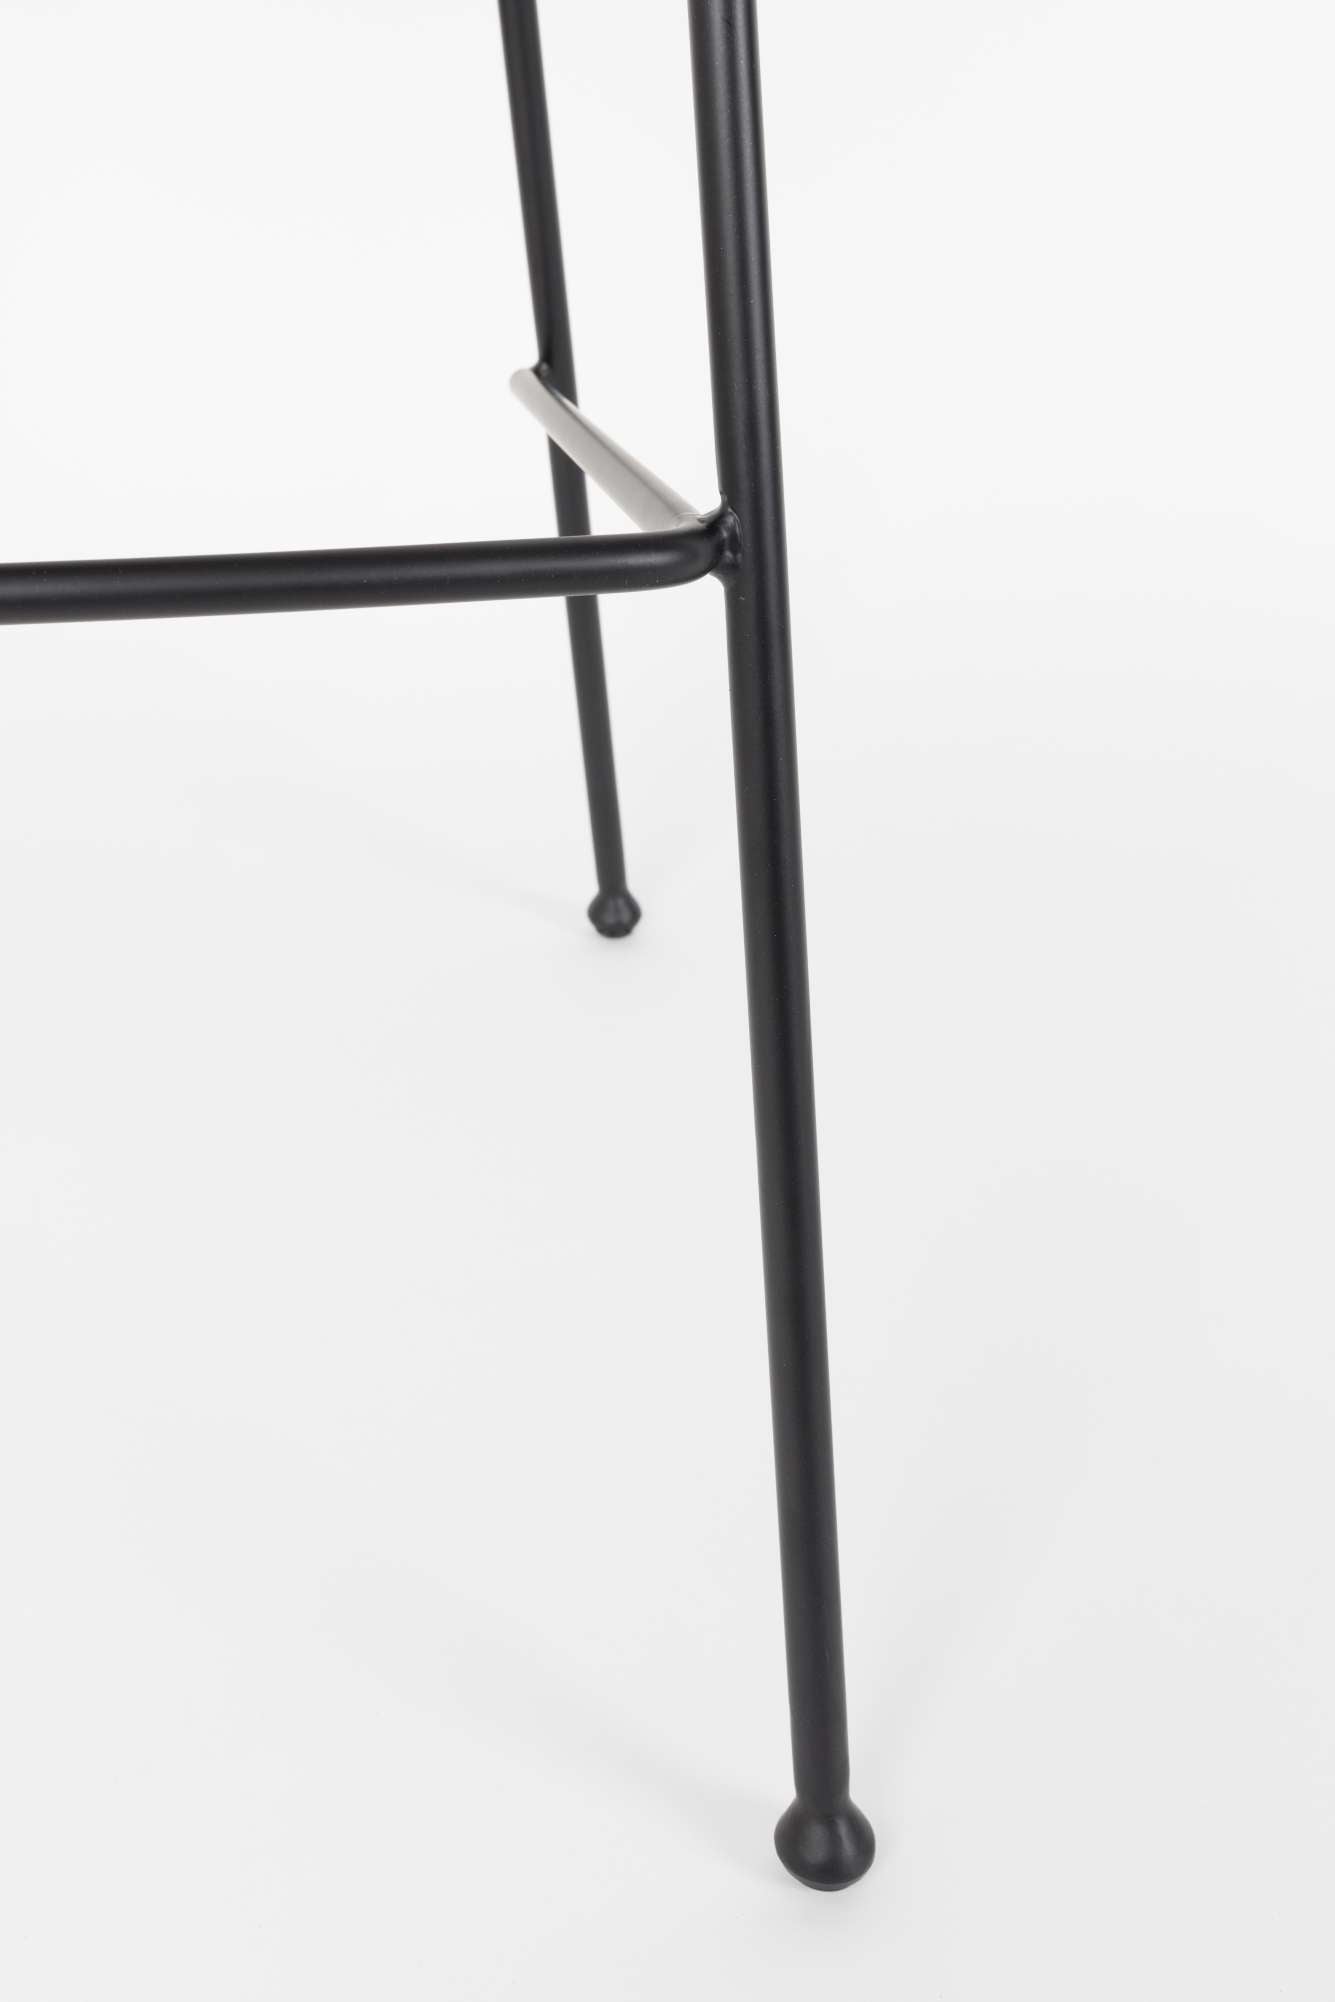 Zuiver | COUNTER STOOL FESTON FAB GREY Default Title